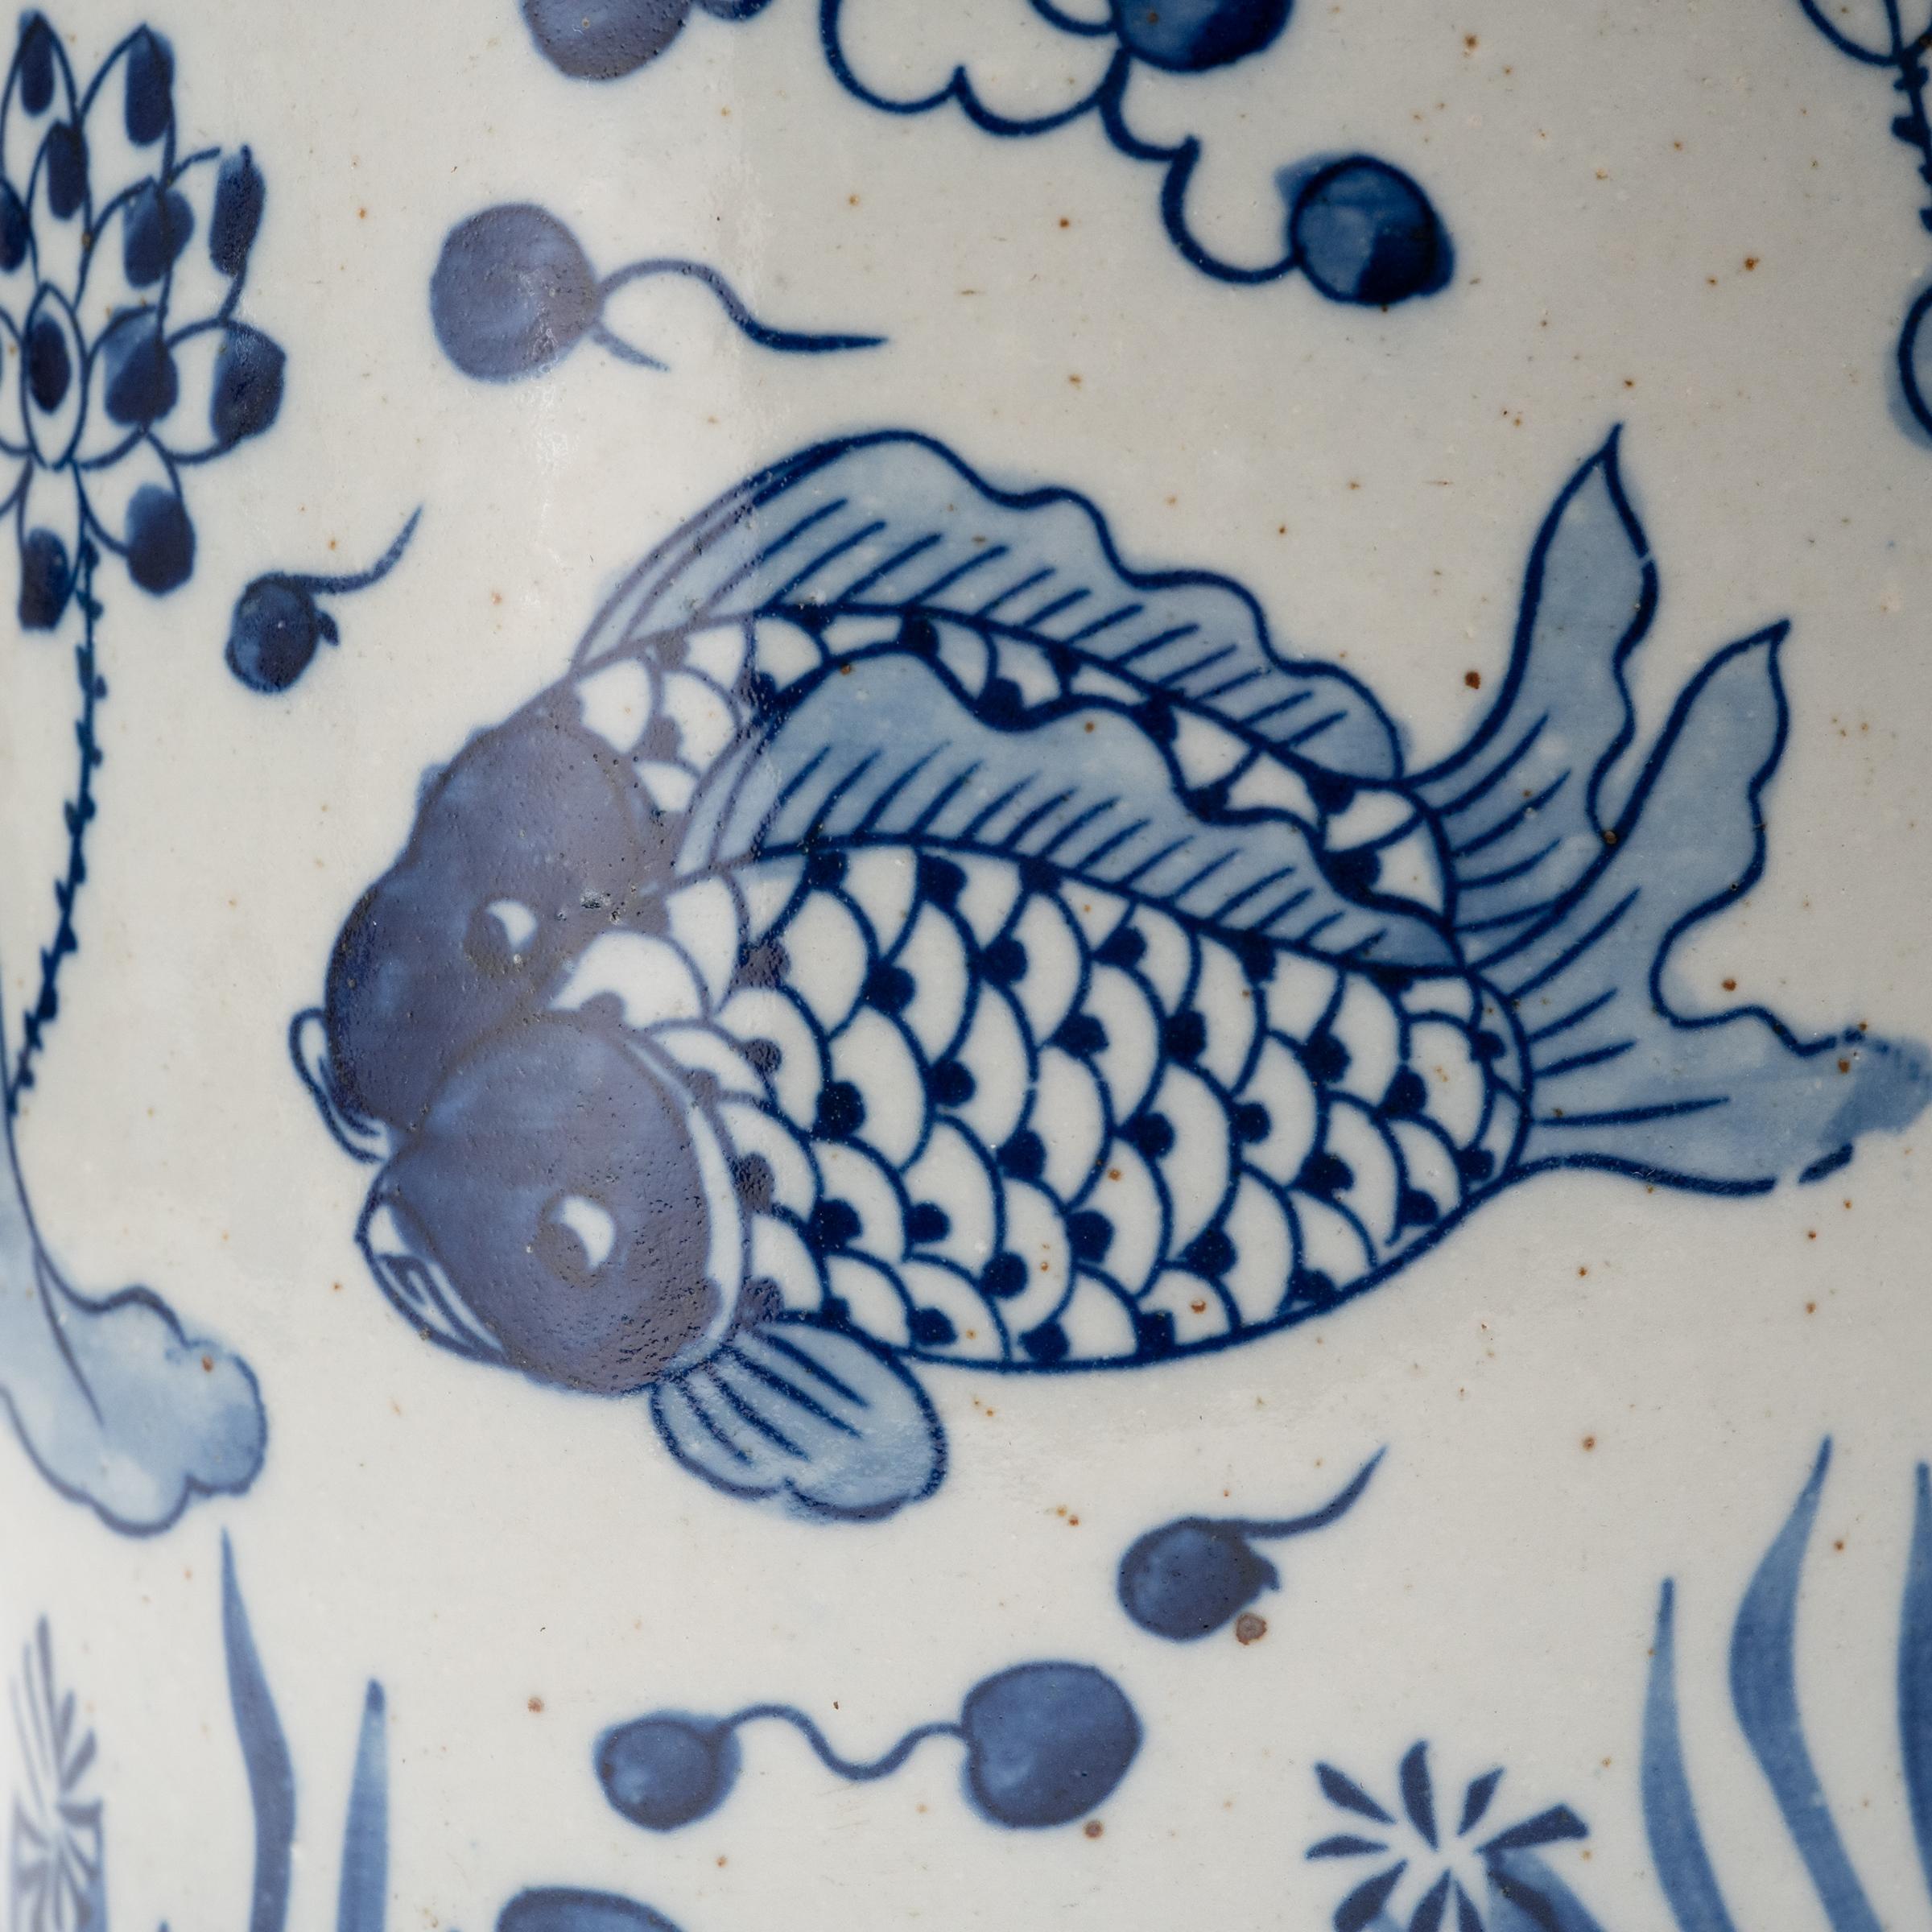 20th Century Blue and White Brush Pot with Fish & Flora